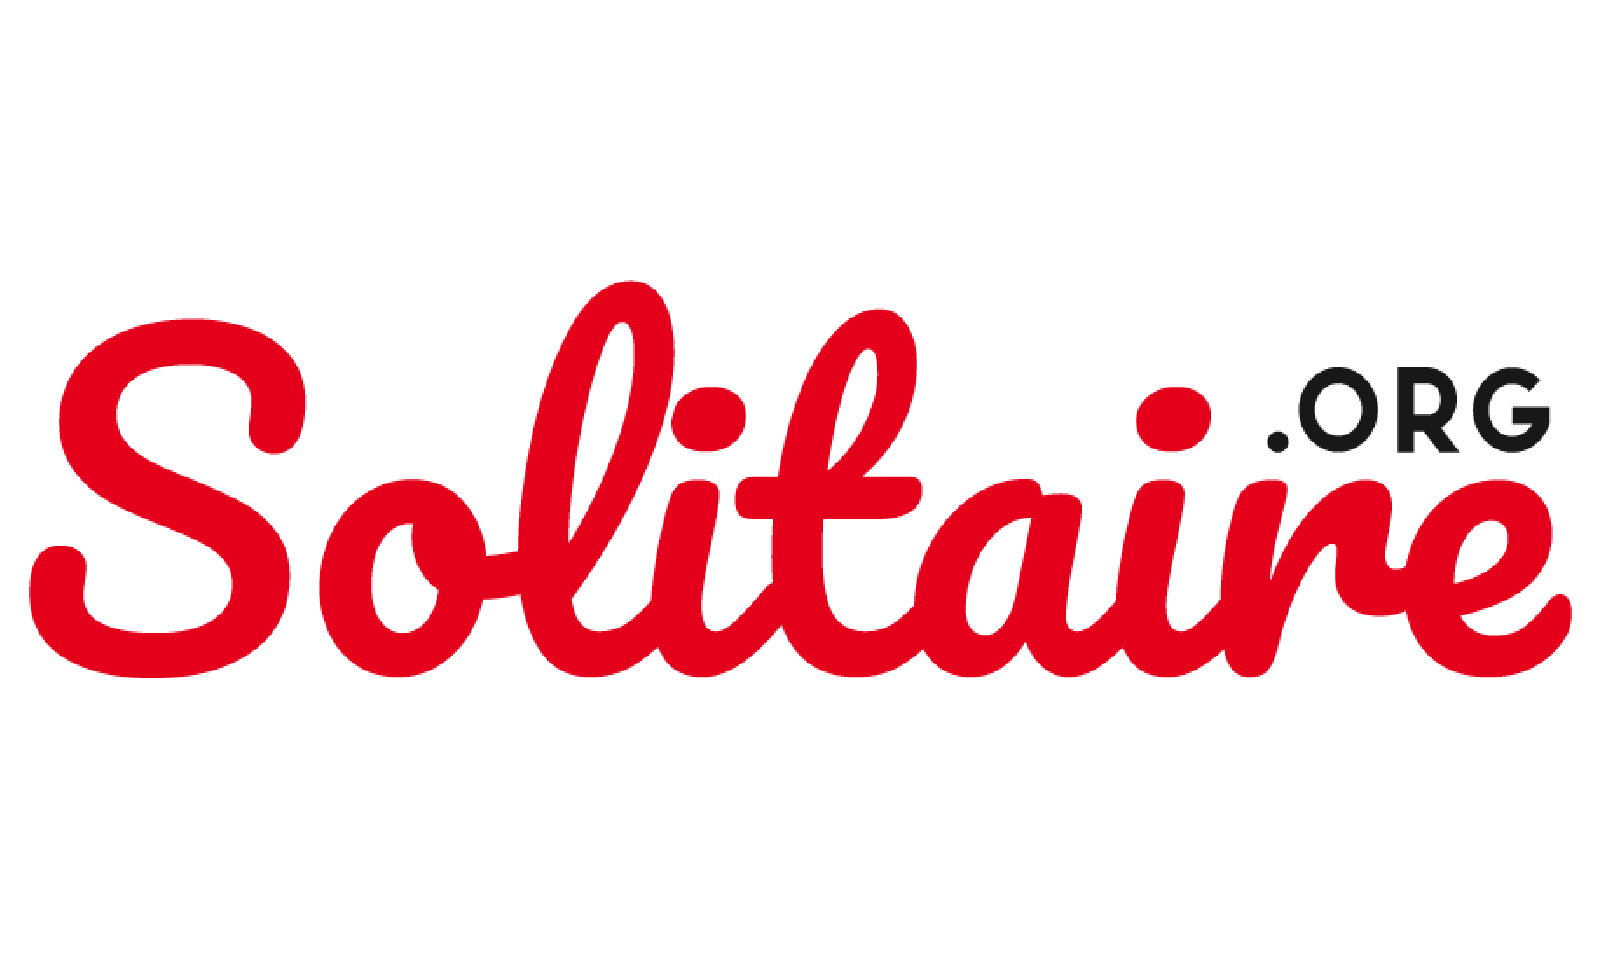 Solitaire - Play Online & 100% Free